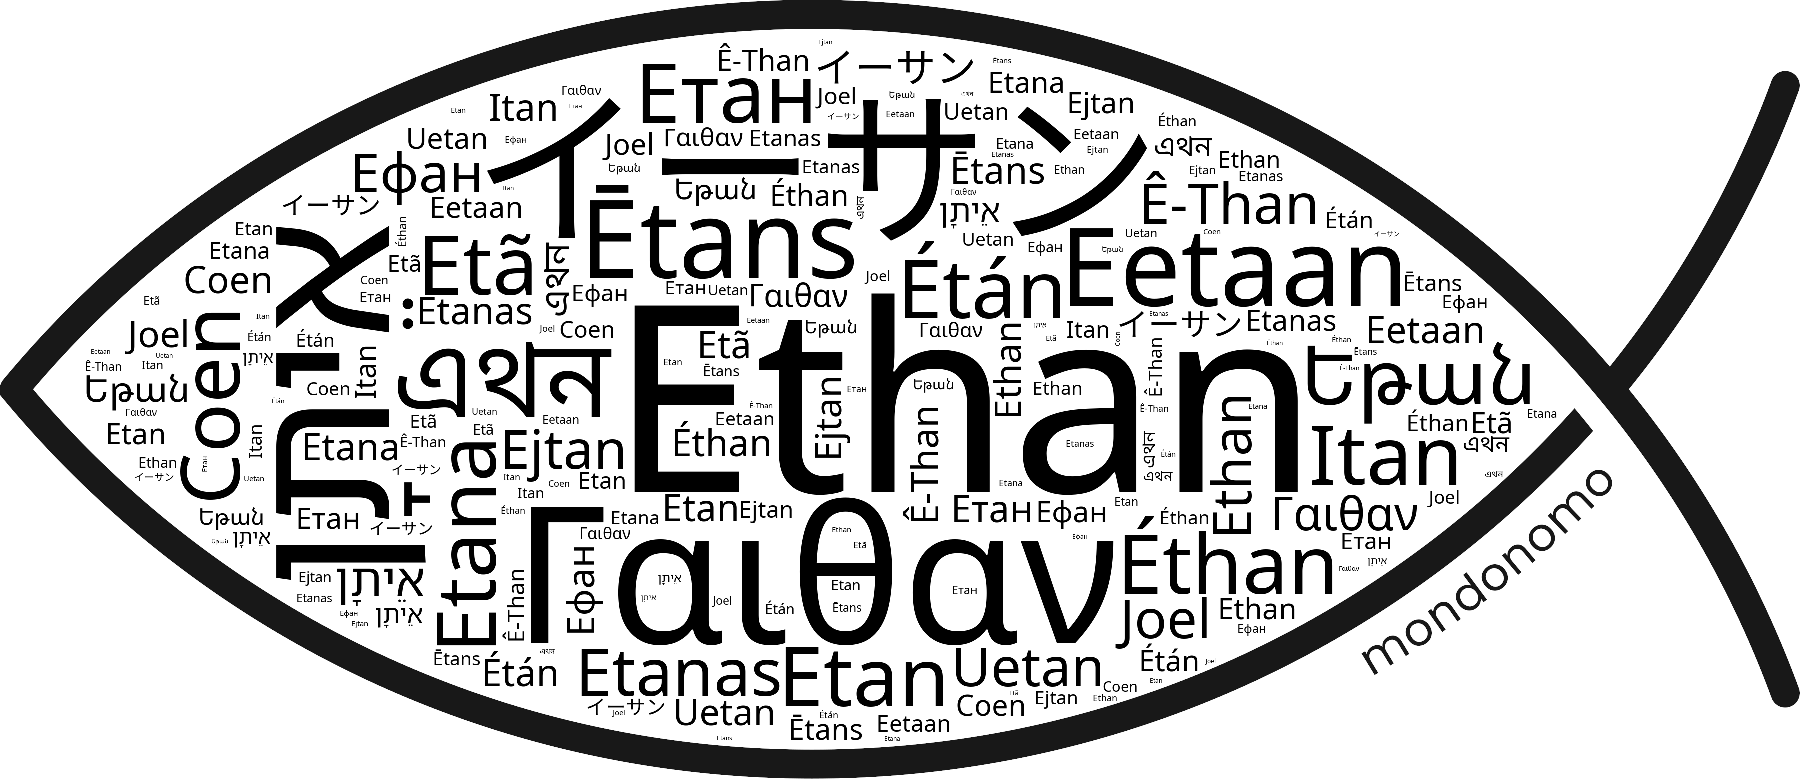 Name Ethan in the world's Bibles